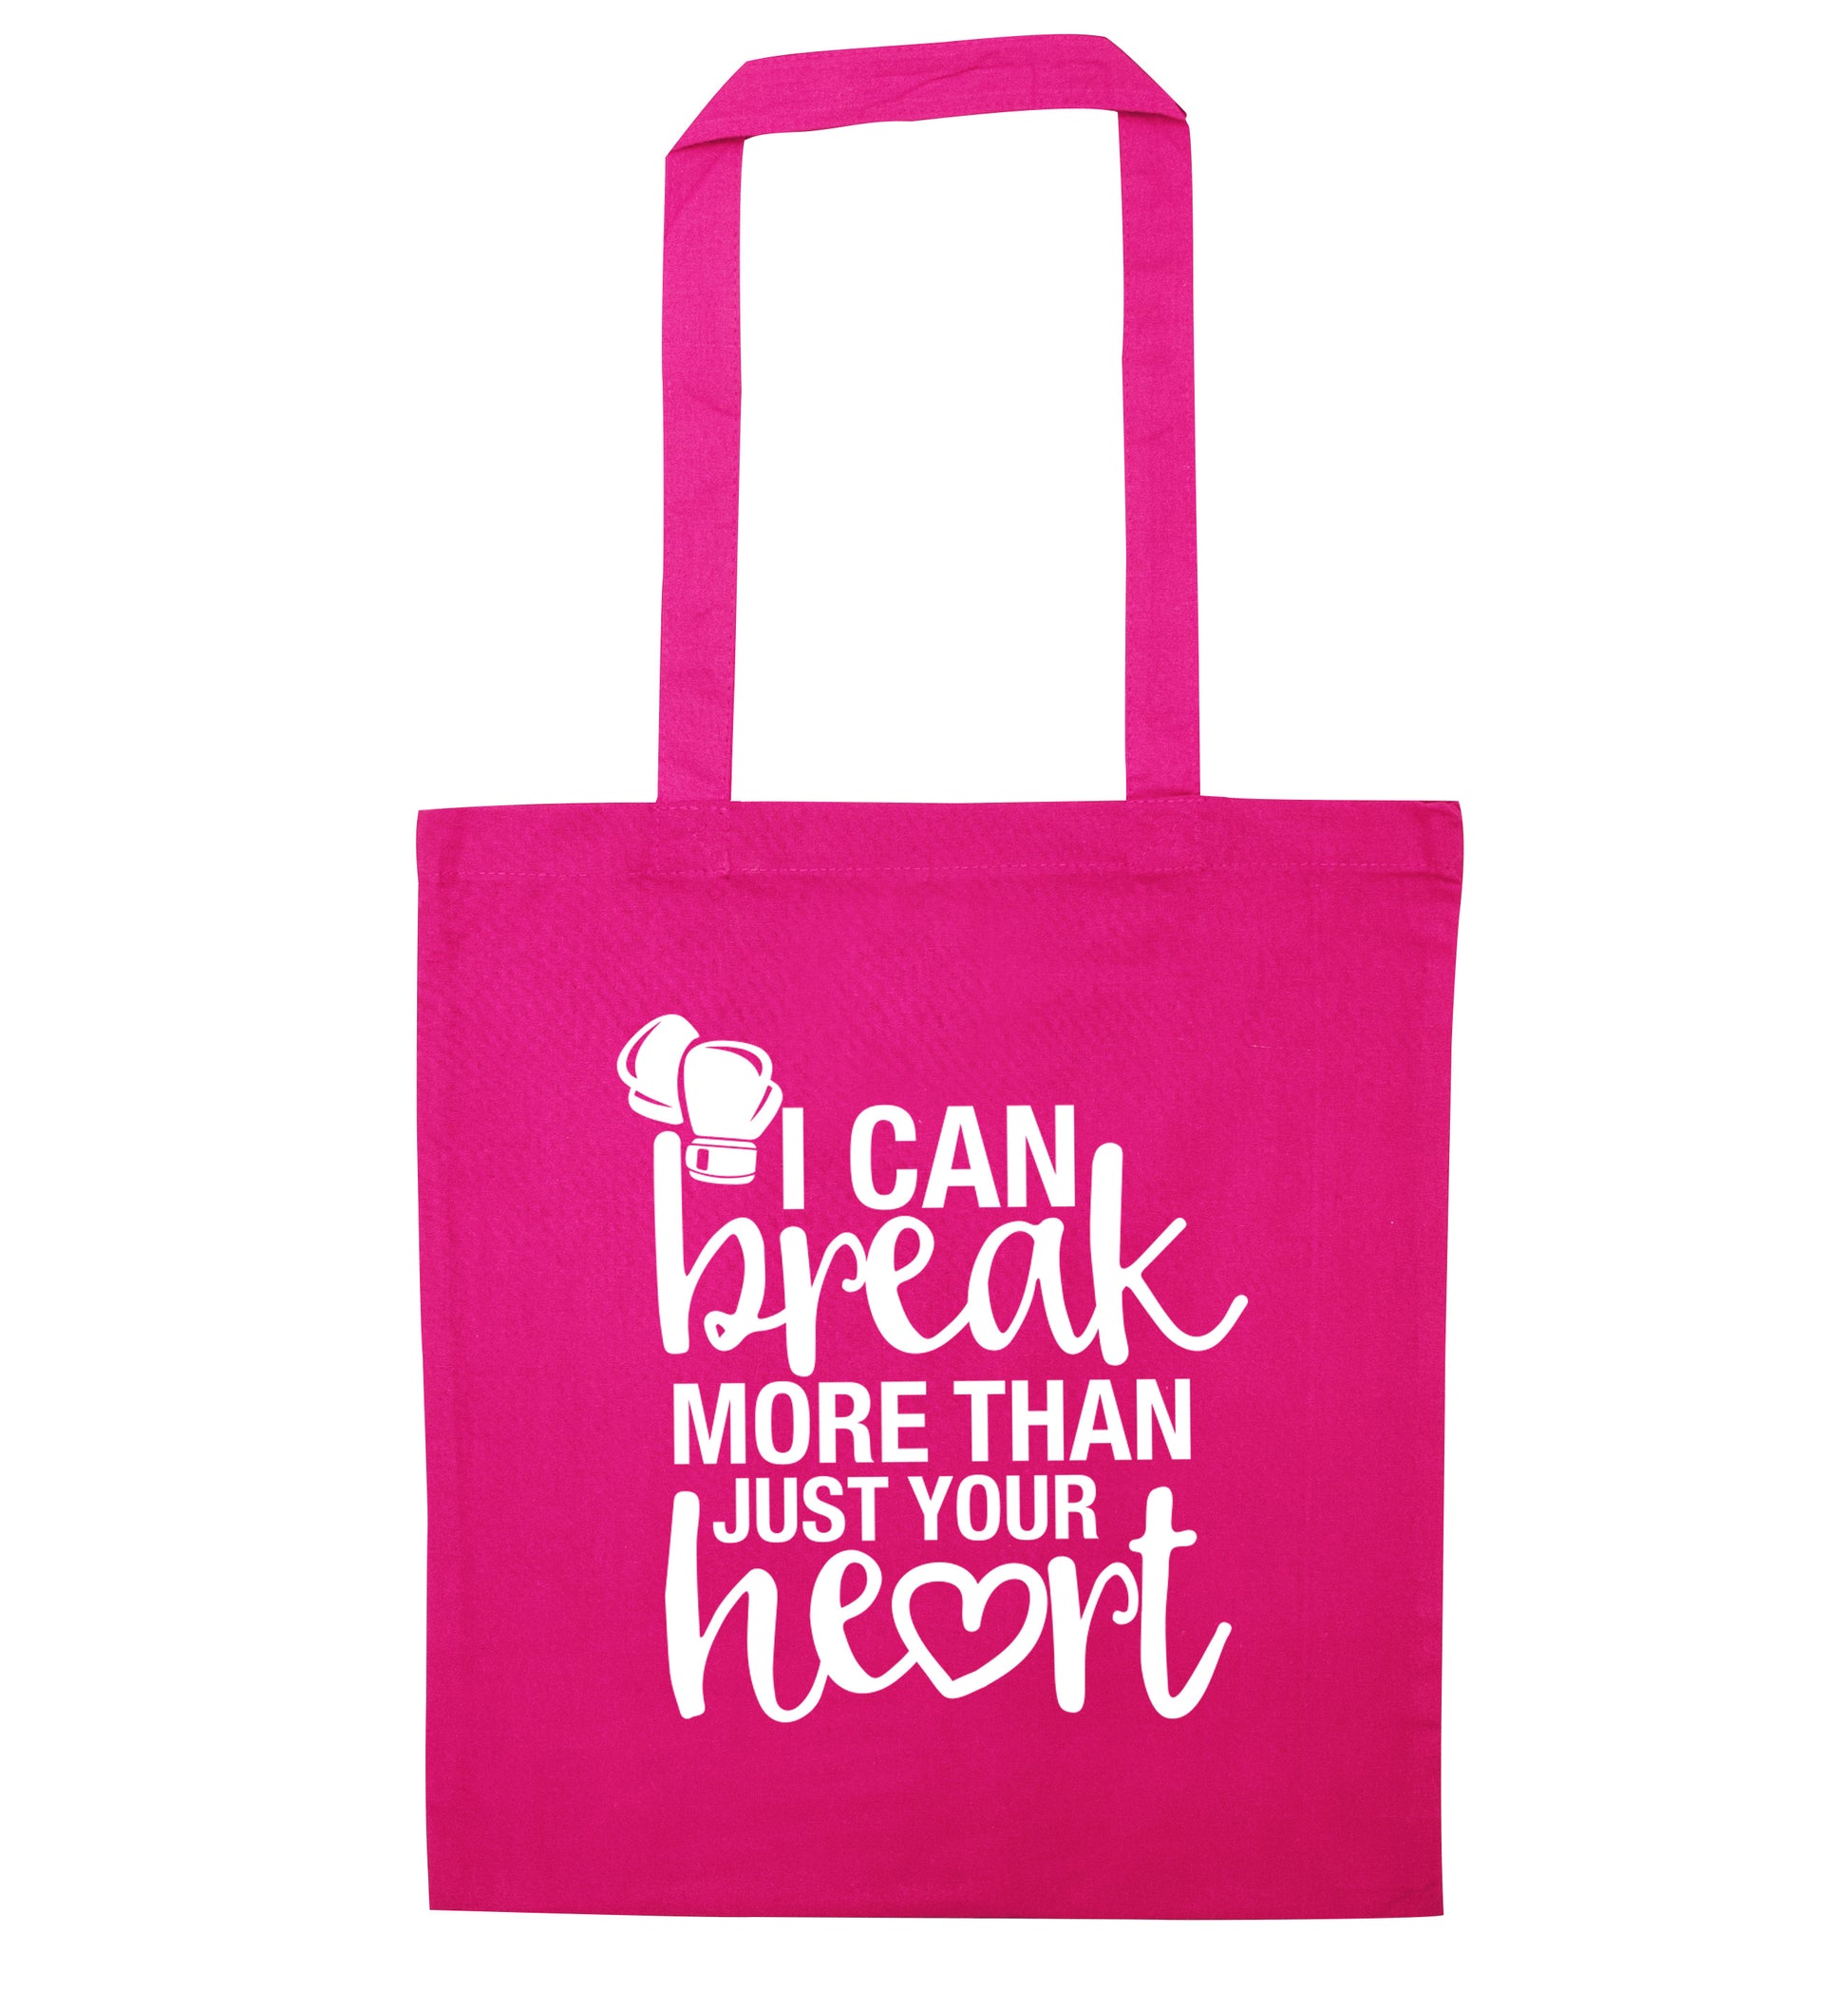 I can break more than just your heart pink tote bag